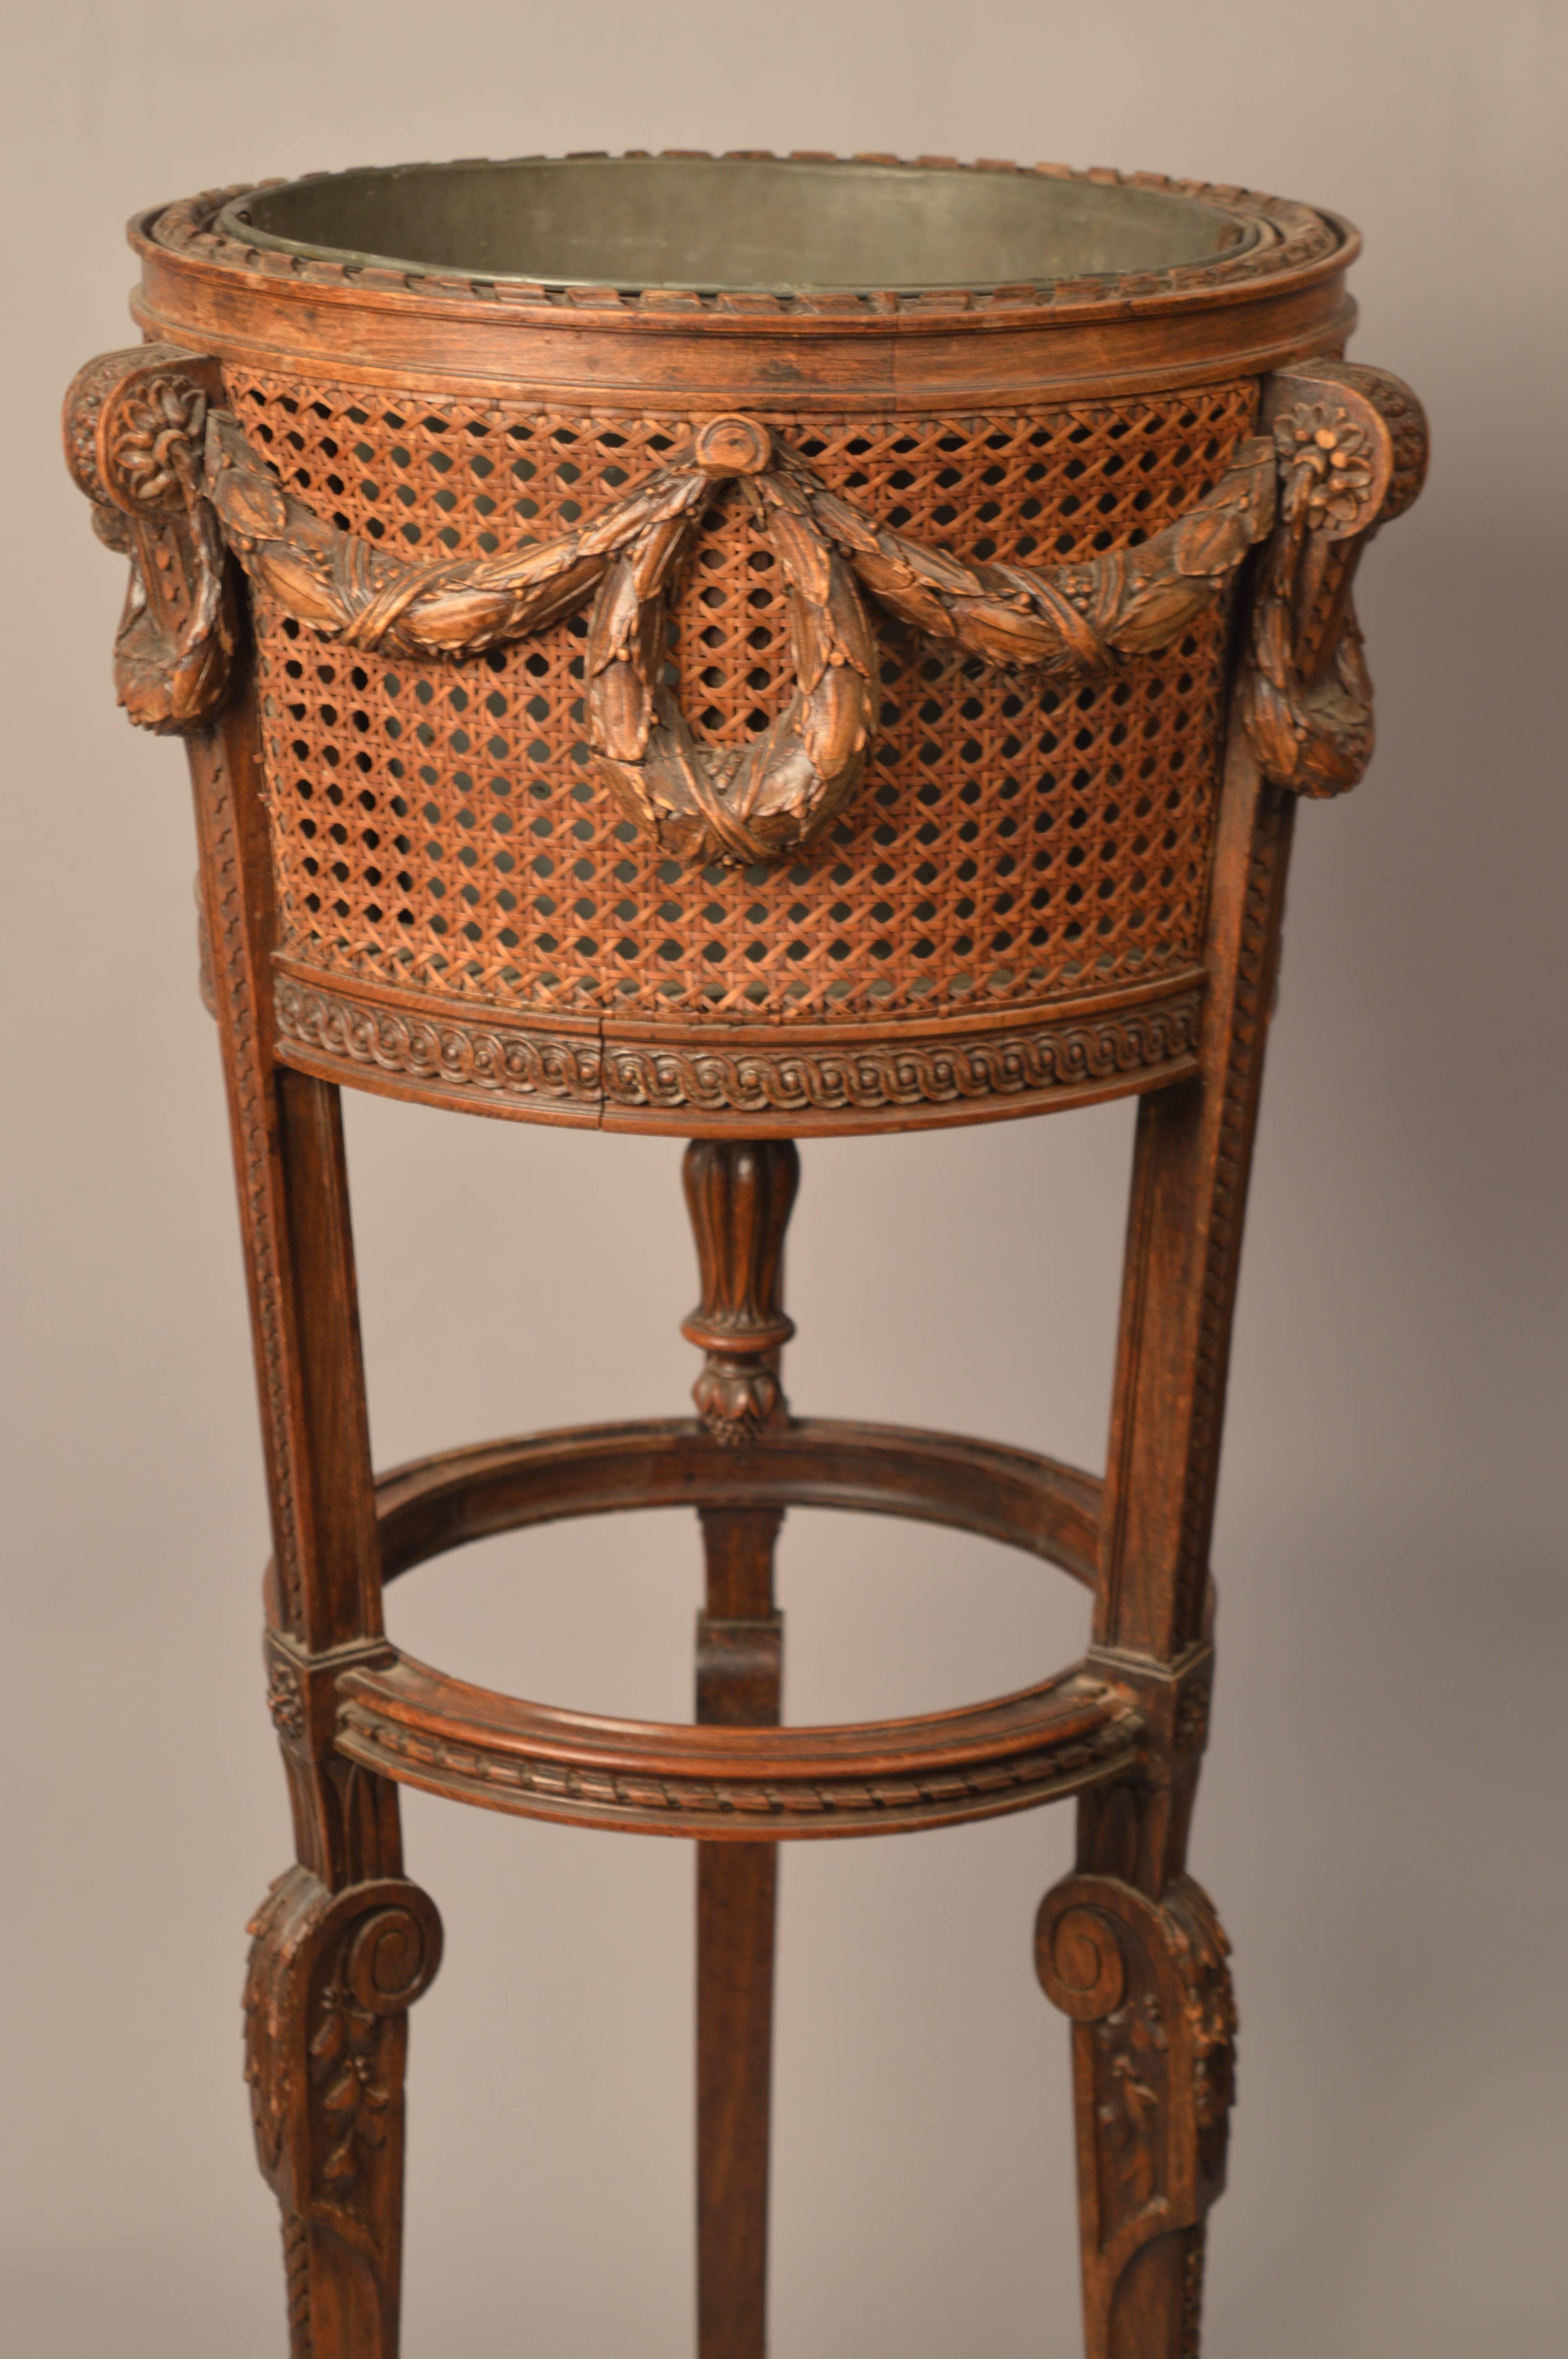 Louis XVI style cane paneled plant Stand retaining the original tole planter insert.
Very fine carved details all in wood.
The last photo is shown as an example of an alternative way to use a standing planter.